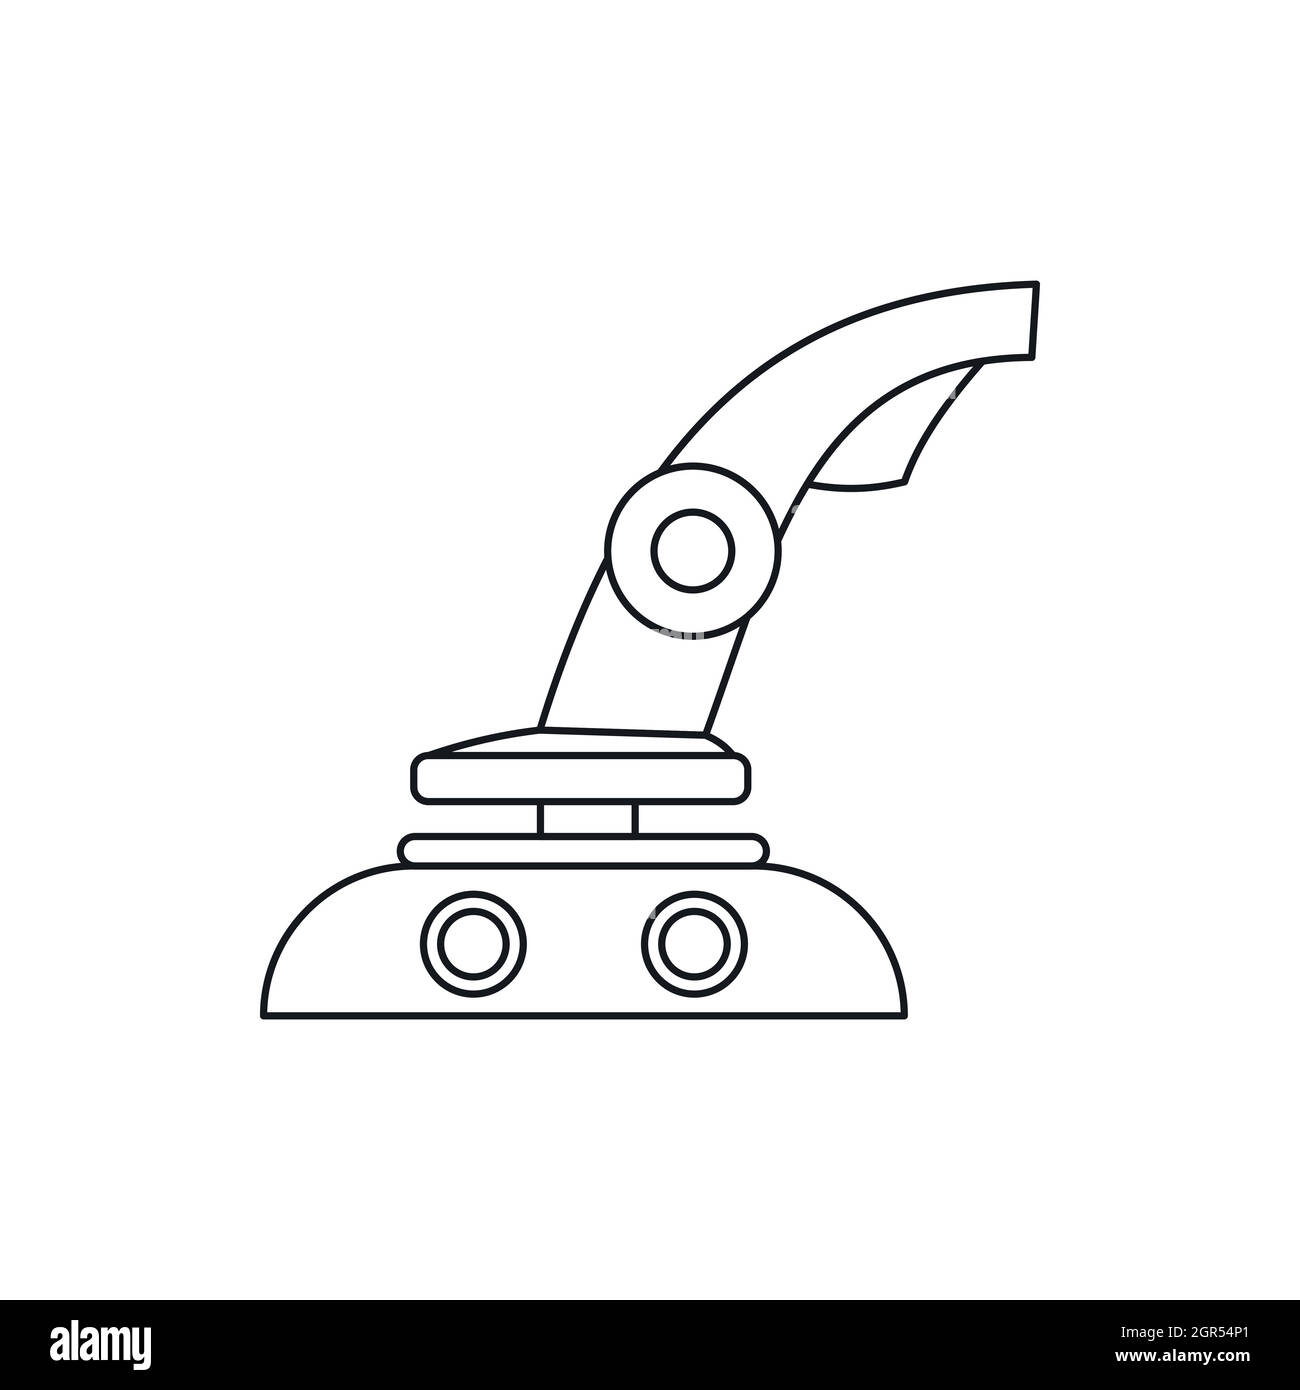 Computer video game joystick icon, outline style Stock Vector